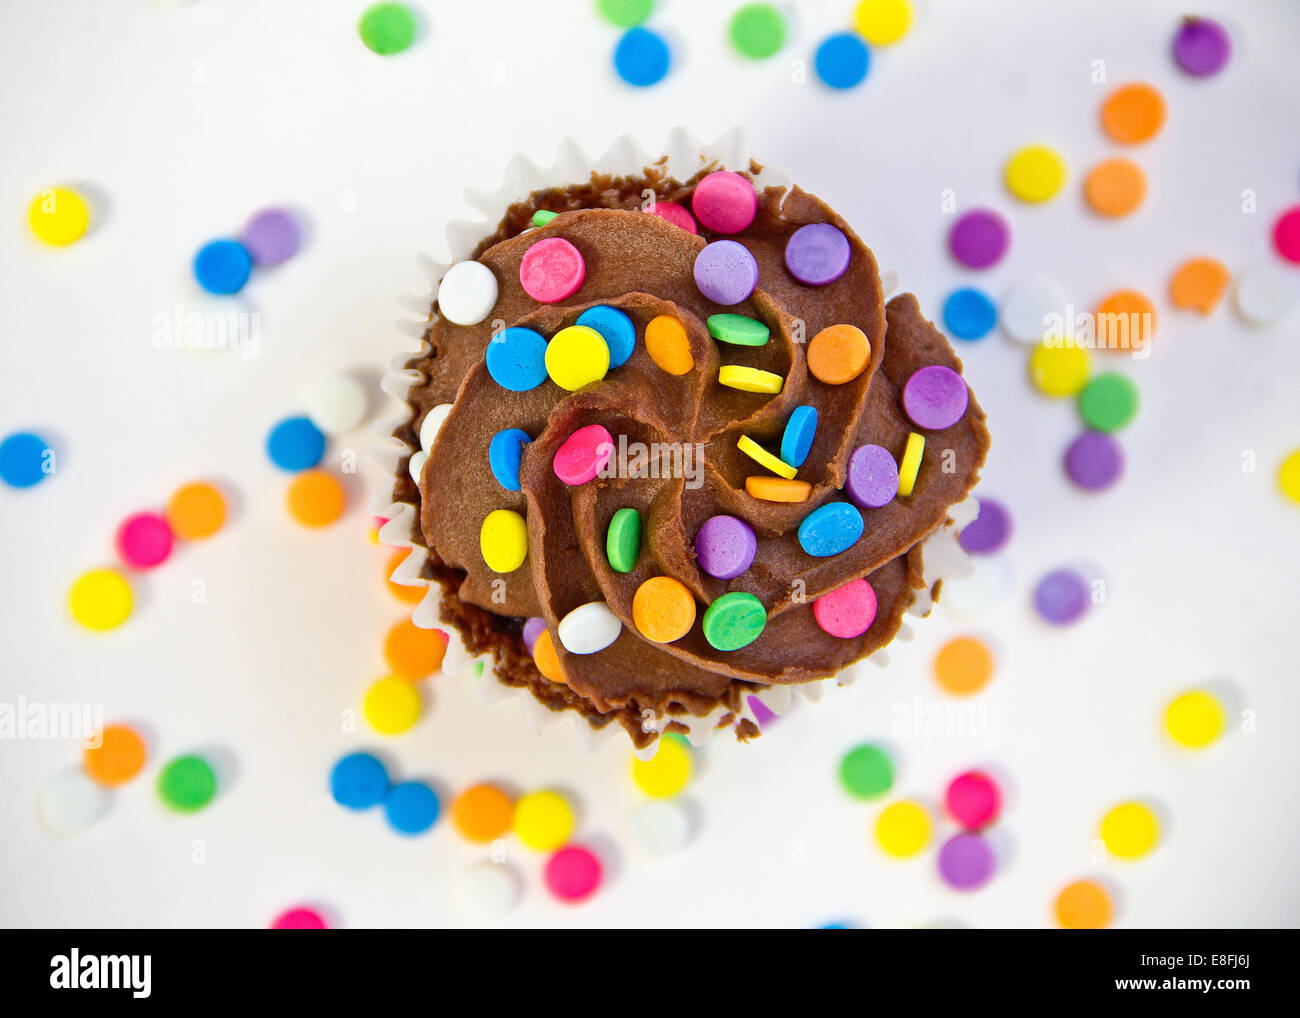 Chocolate cupcake covered with buttercream frosting and multi coloured sprinkles Stock Photo